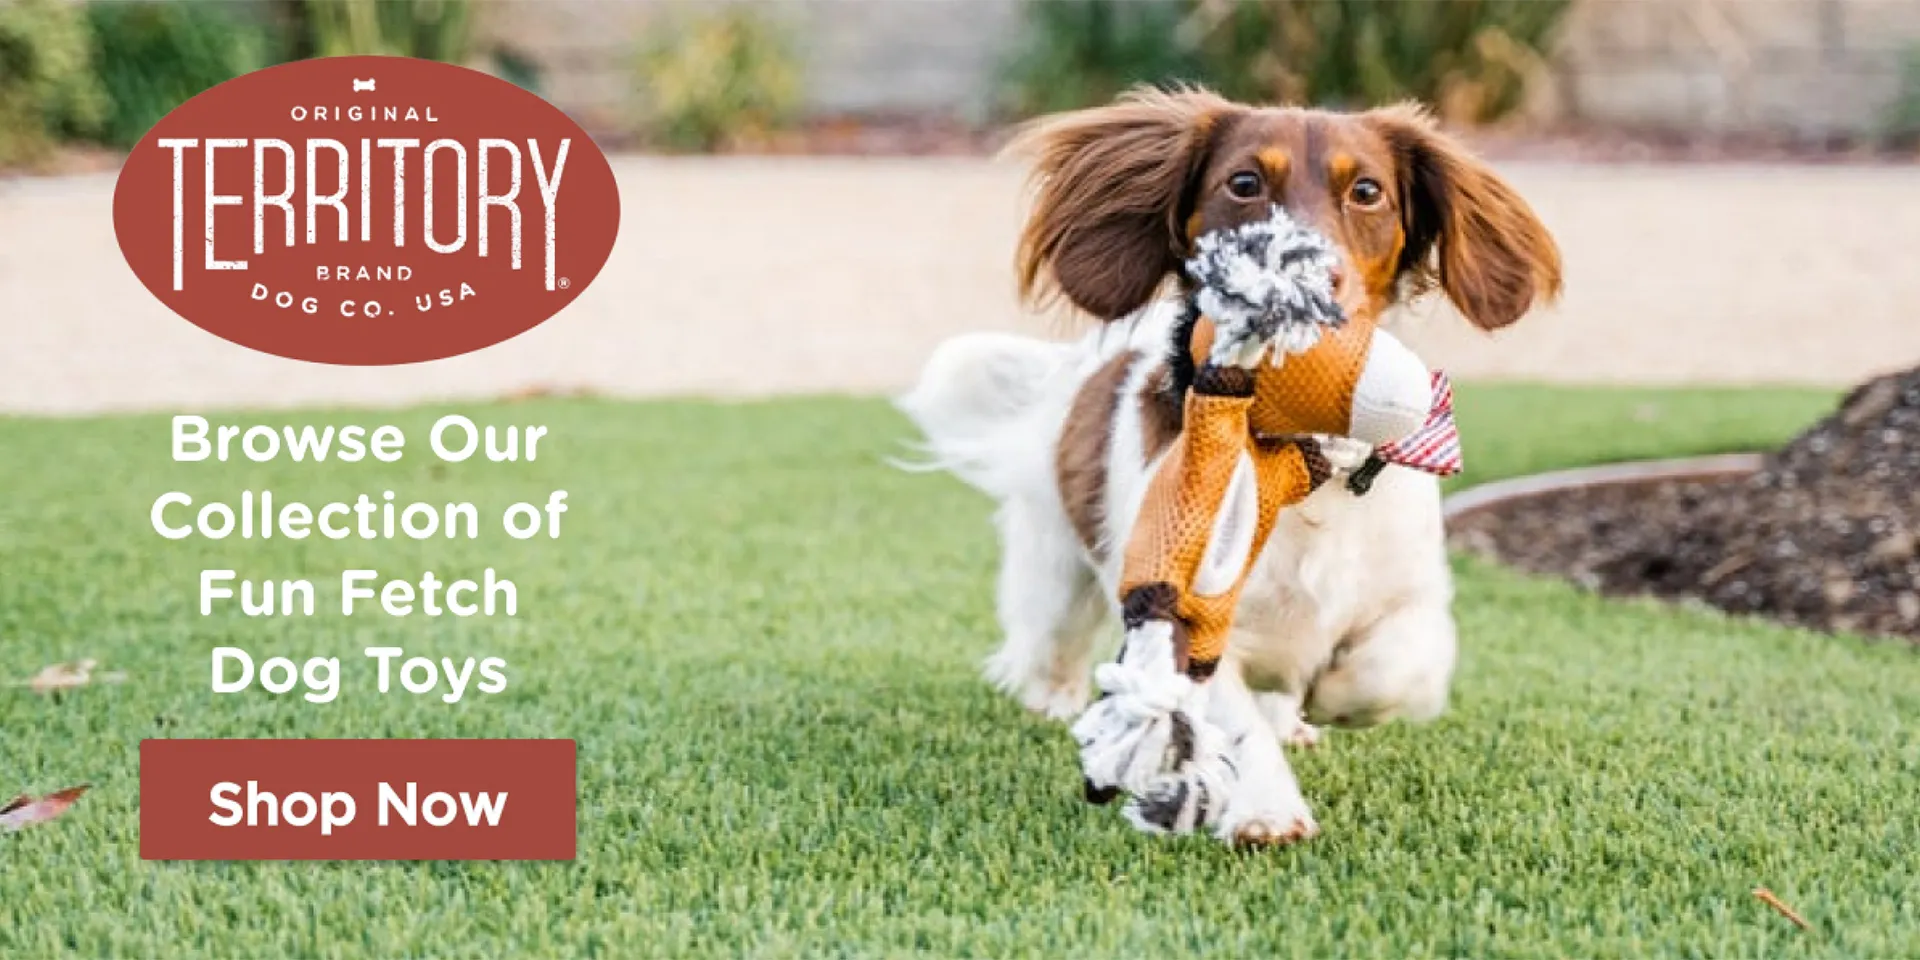 Territory Fetch Dog Toys Collection Homepage Banner